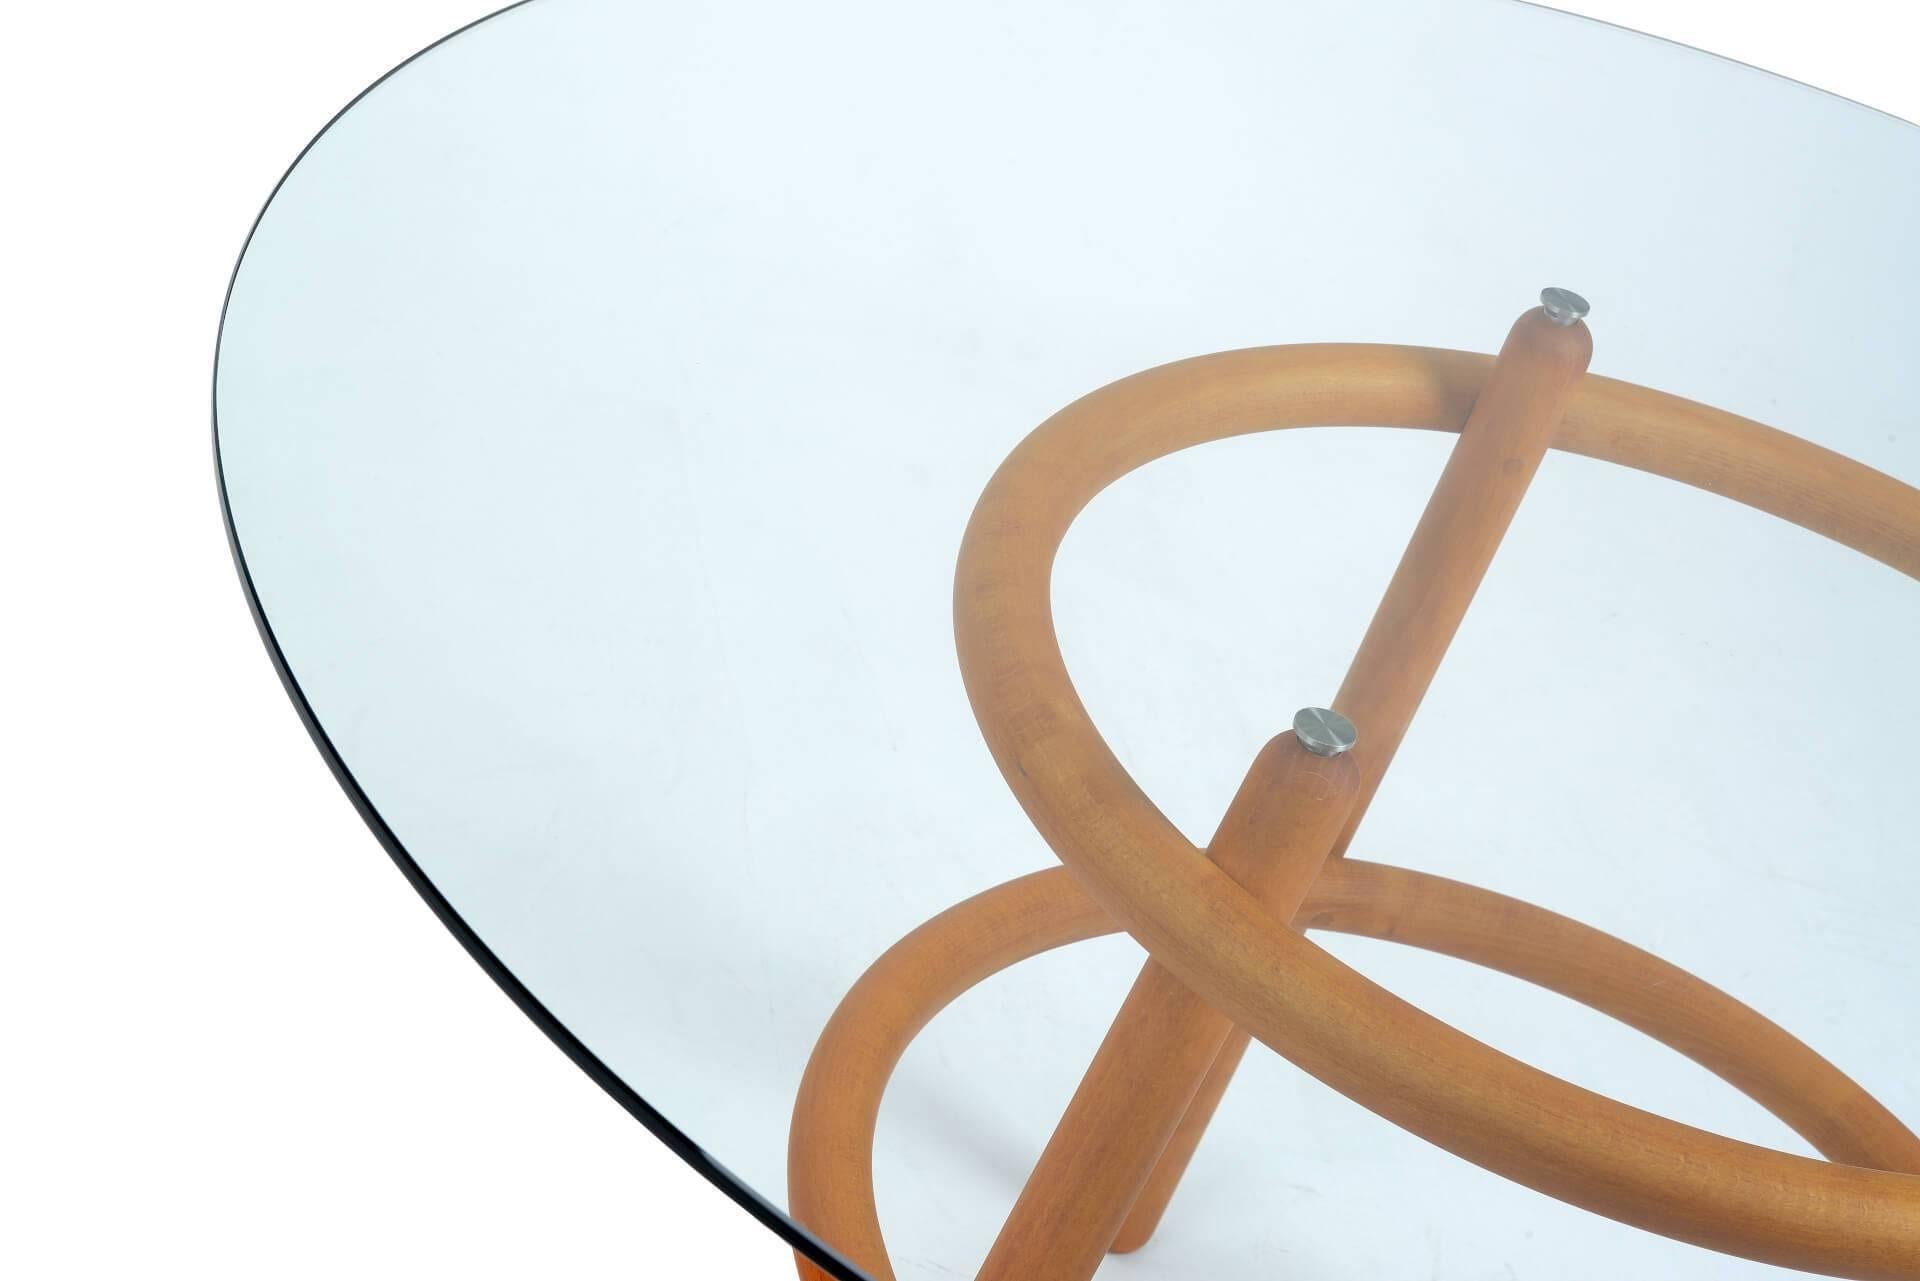 Support structure in solid beech with round section elements. The base is made up of three legs intersected by two hoops of the same diameter. The round, flush top is in extra clear transparent glass.